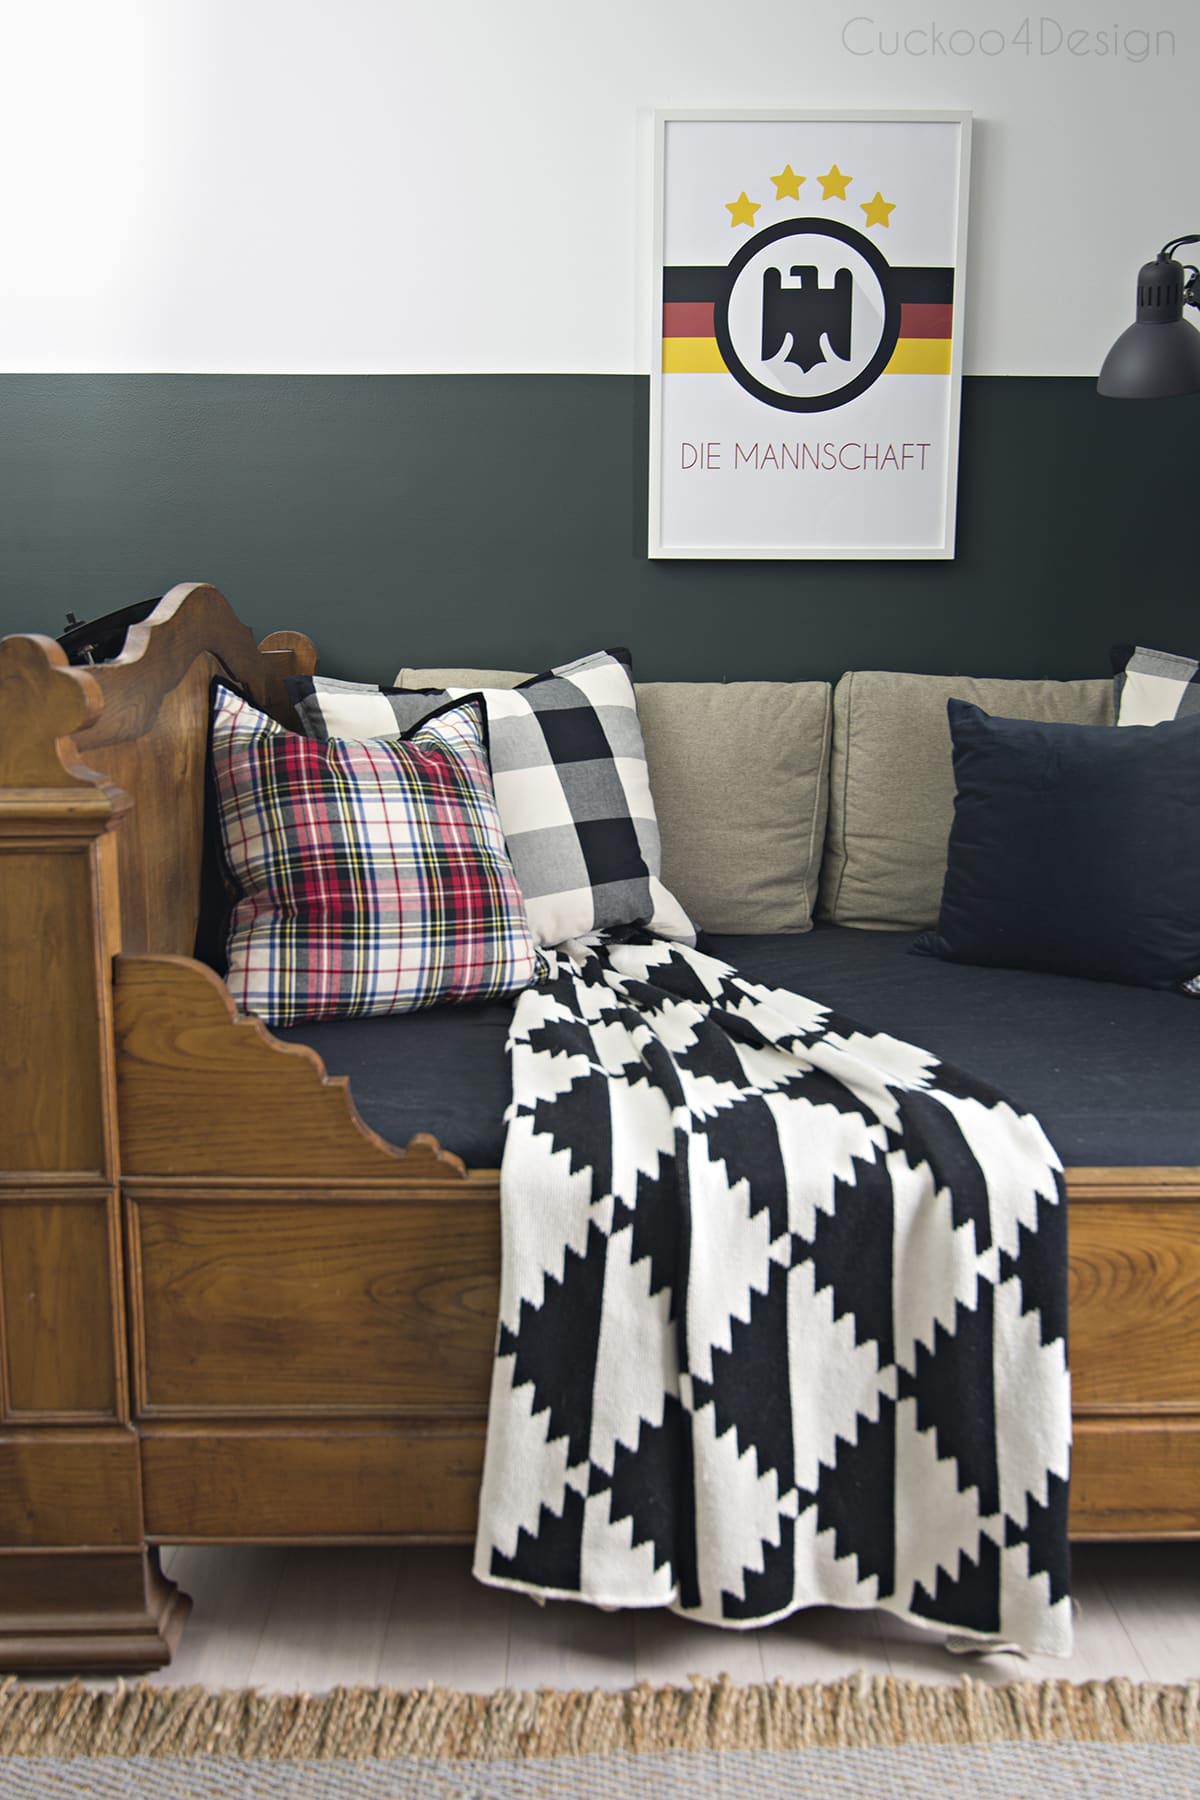 butterscotch leather butterfly chair in sophisticated boys bedroom with dark green walls, mixed plaids and soccer memorabilia 